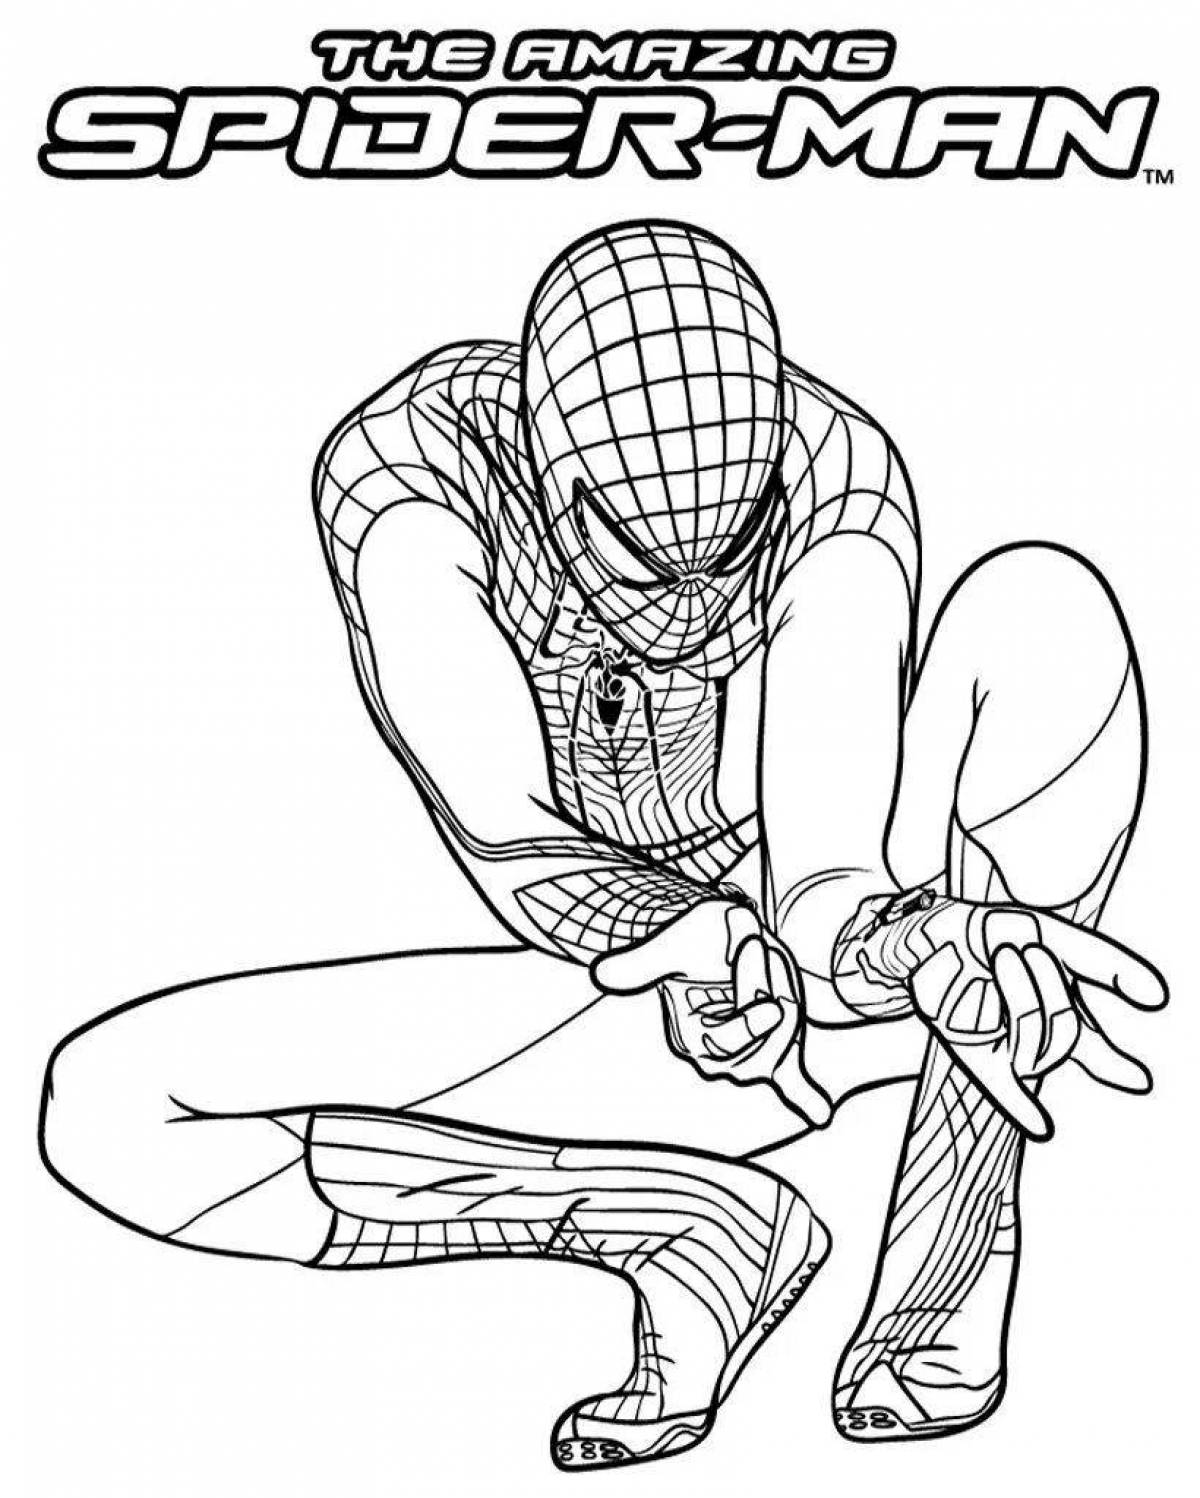 Spider-man living christmas coloring book